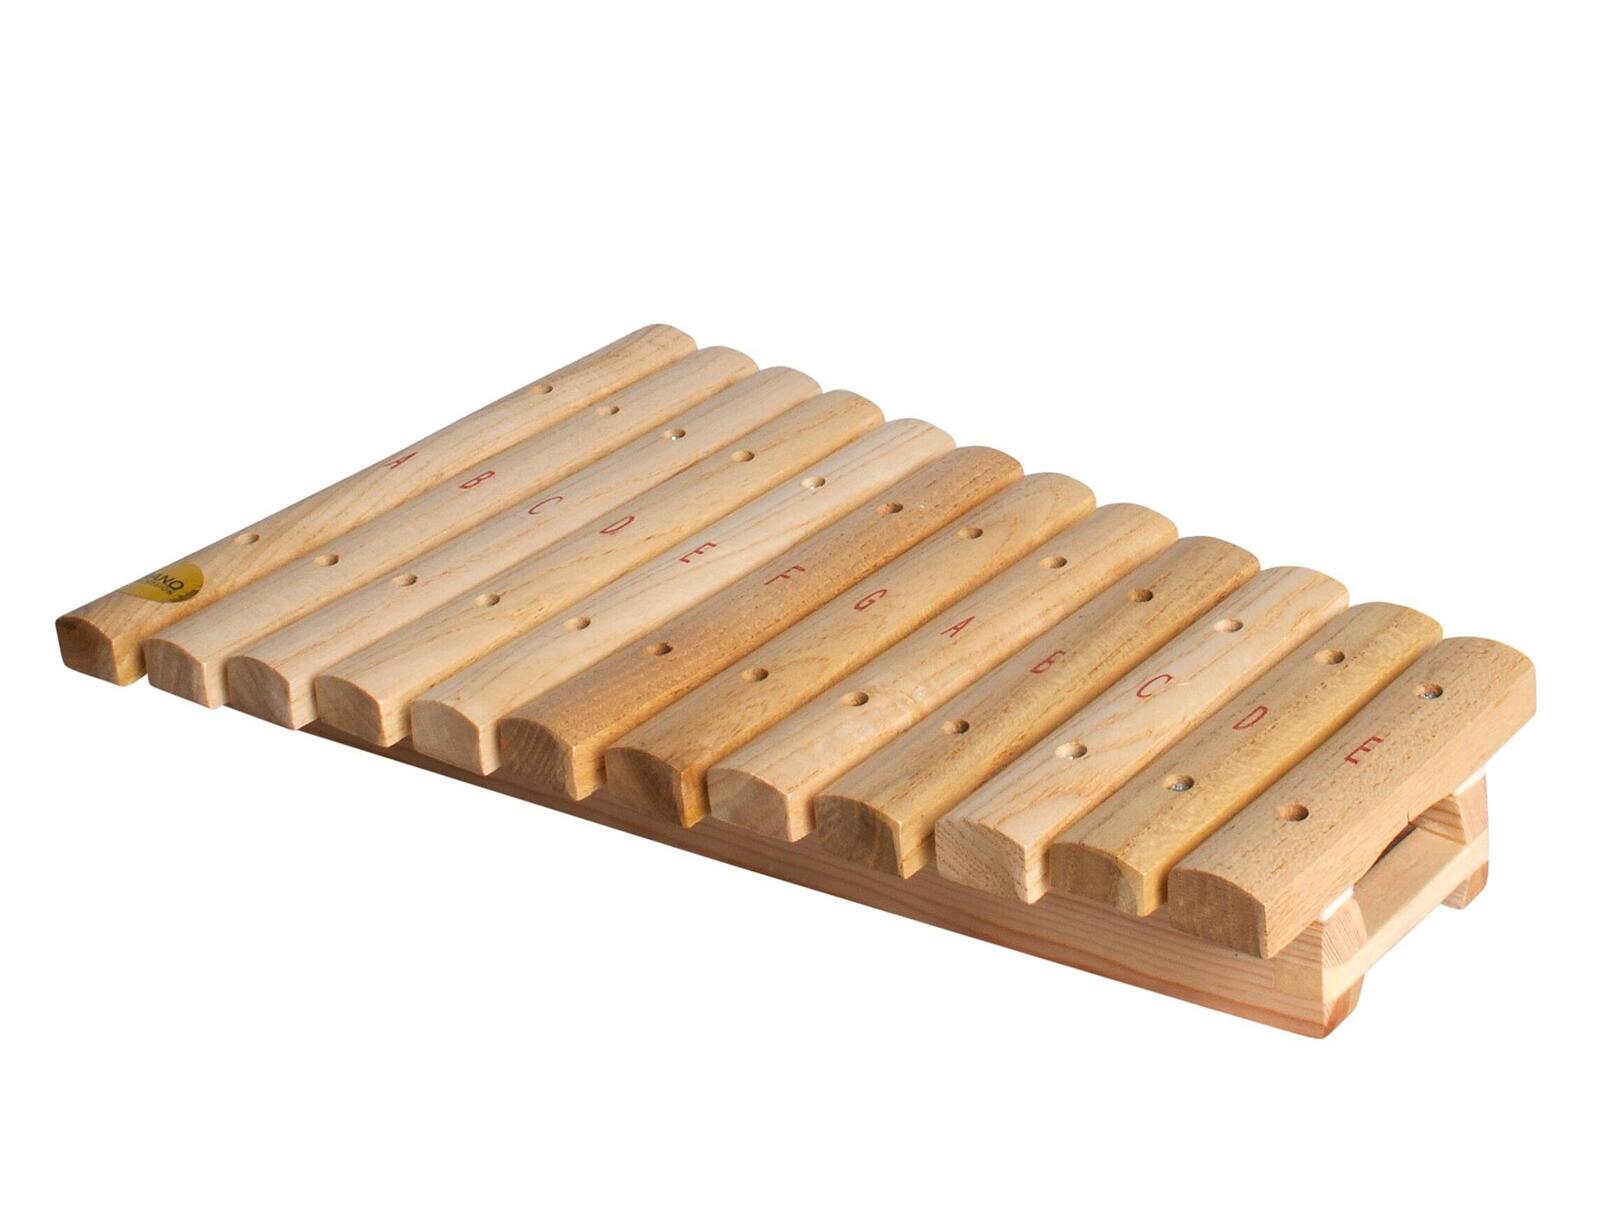 Mano Percussion - Xylophone en bois, 8 notes avec mailloches